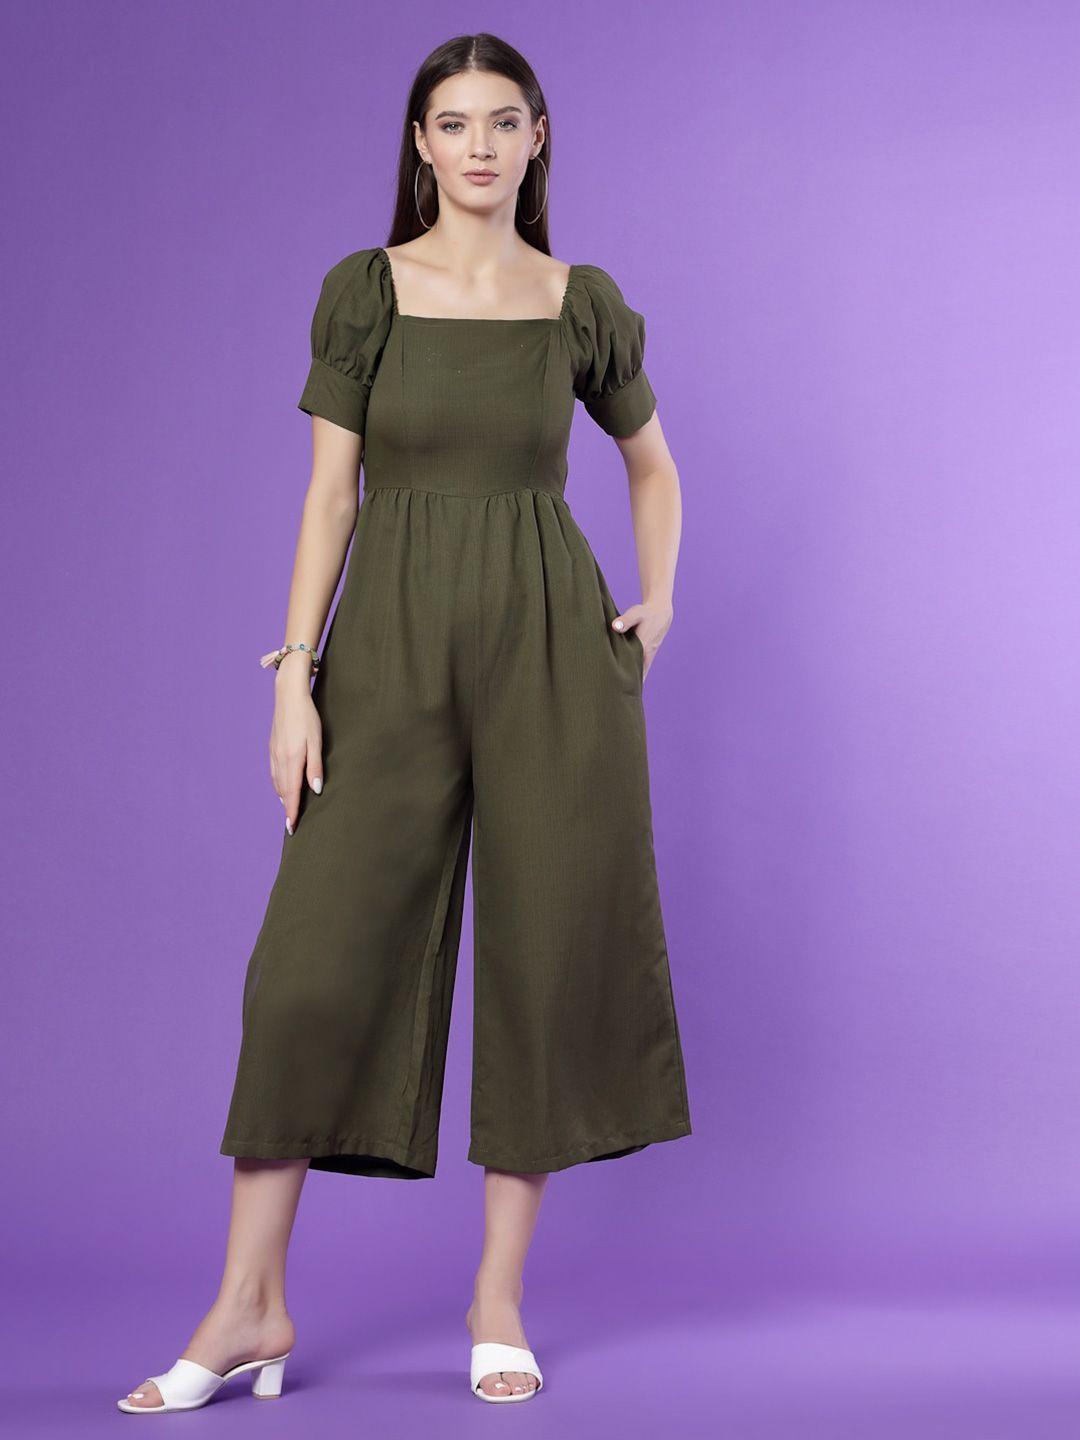 kook n keech olive green square neck puffed sleeves basic jumpsuit